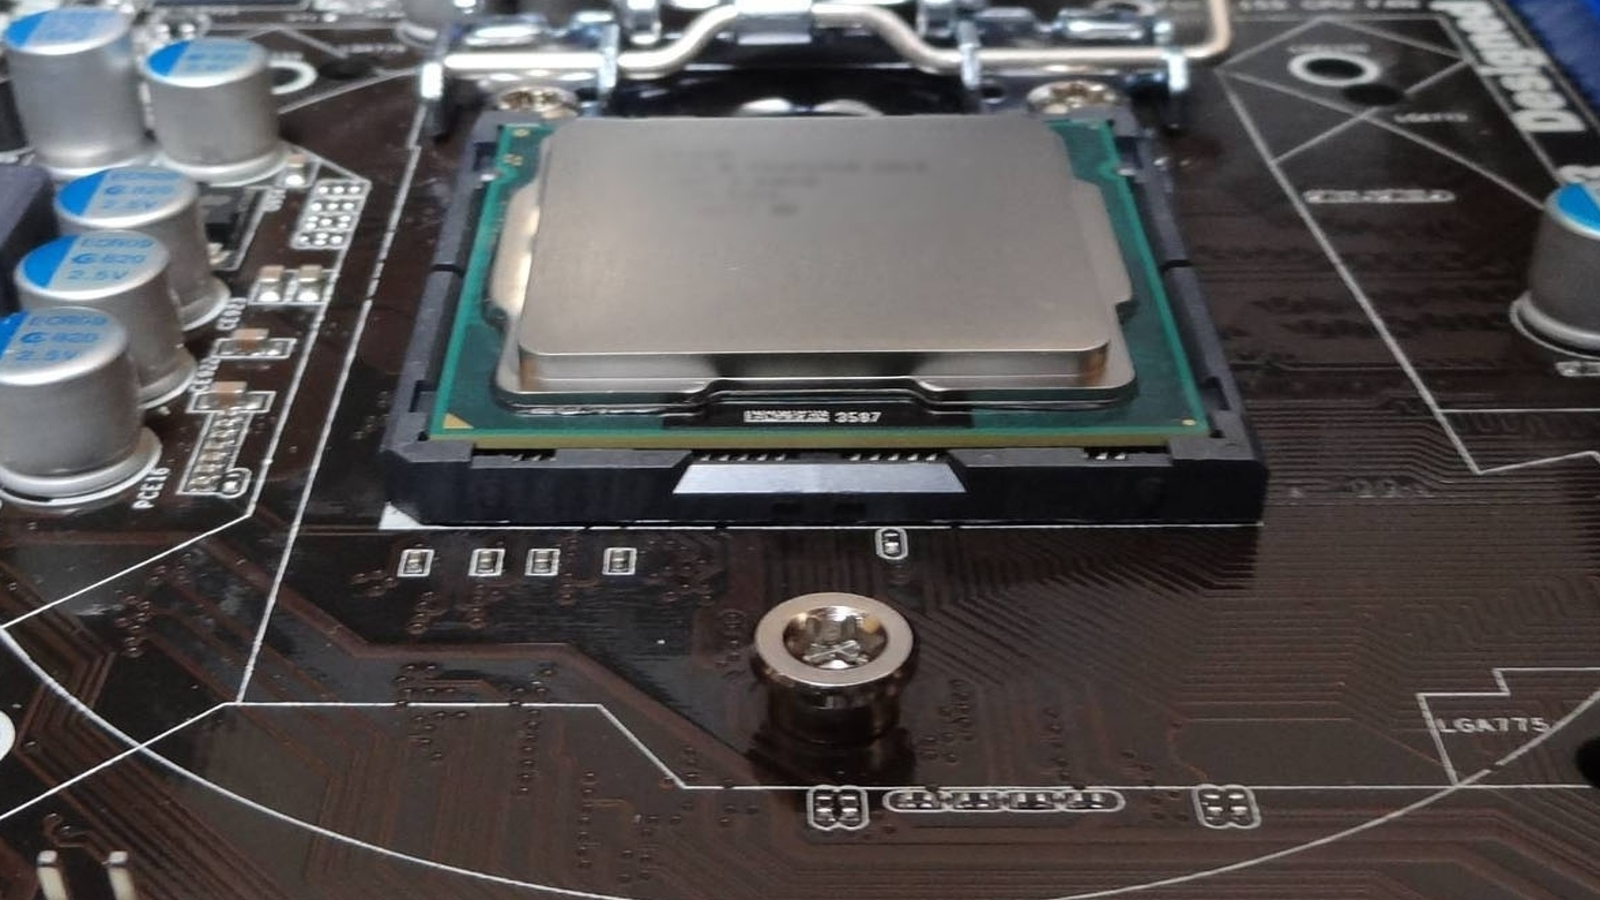 How to Future Proof Your PC for Next Generation Gaming